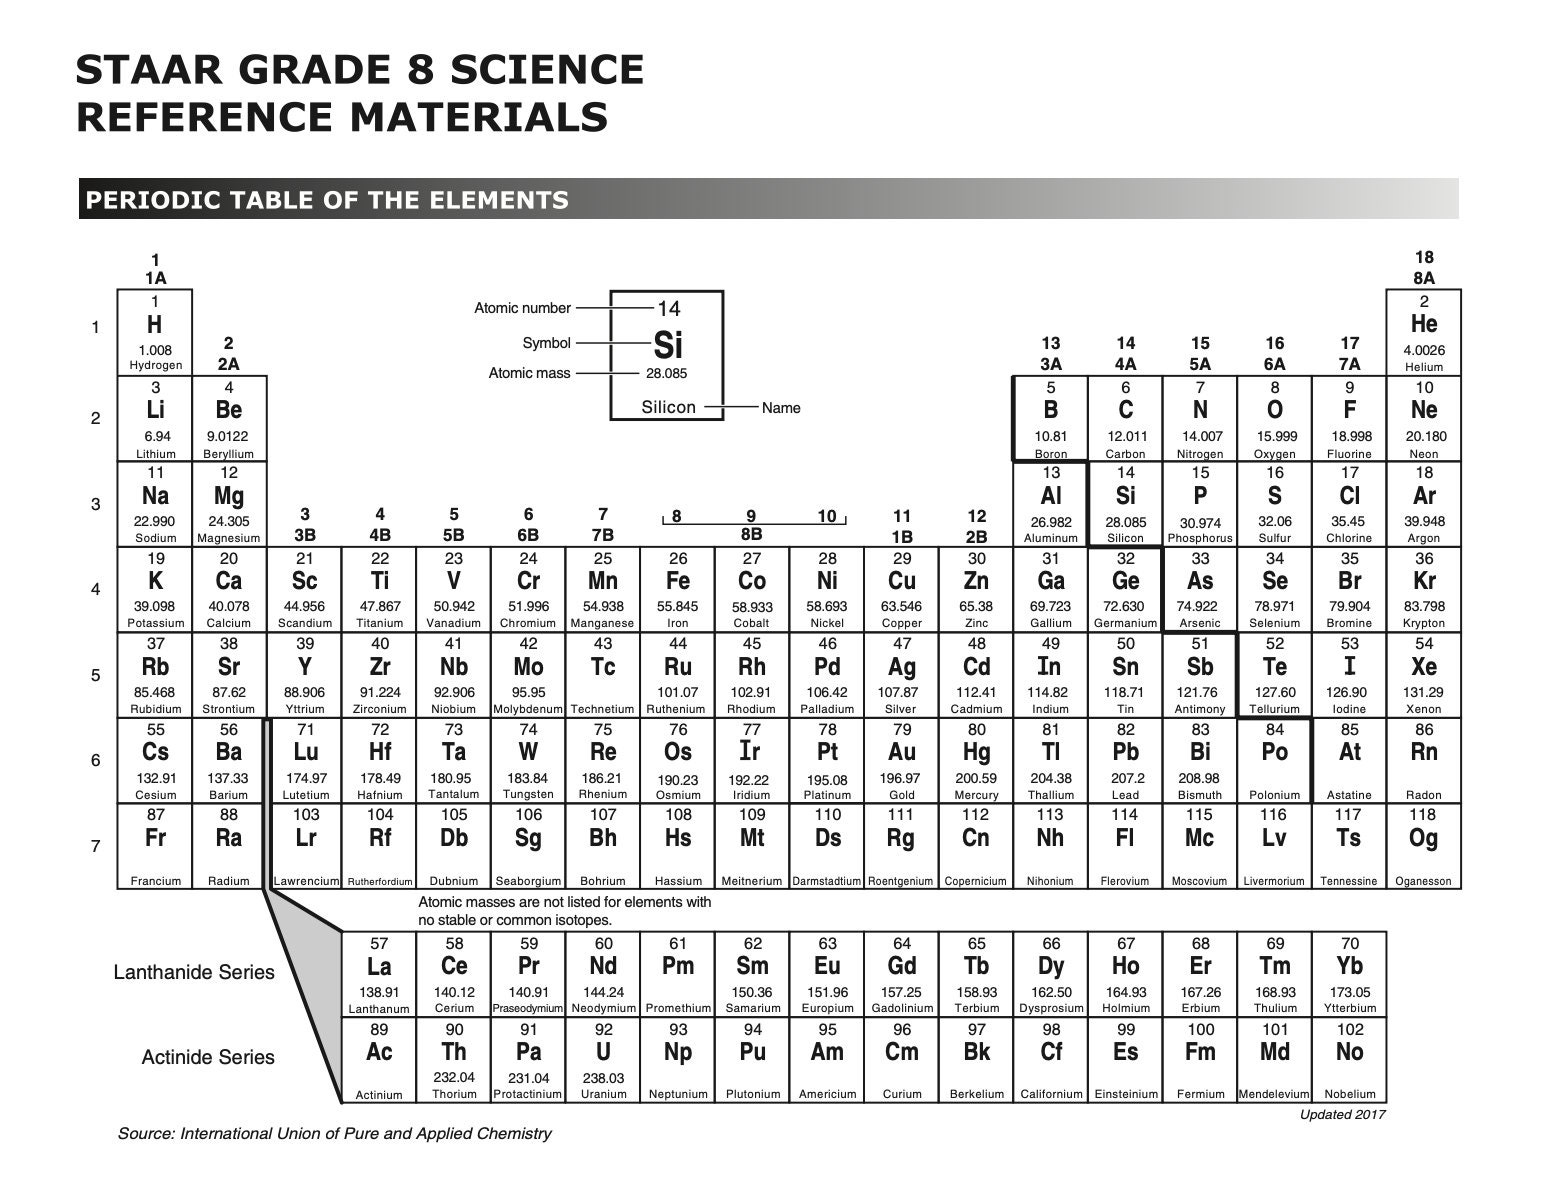 Science, STAAR, Reference Material, Periodic Table, 8th Grade, Poster